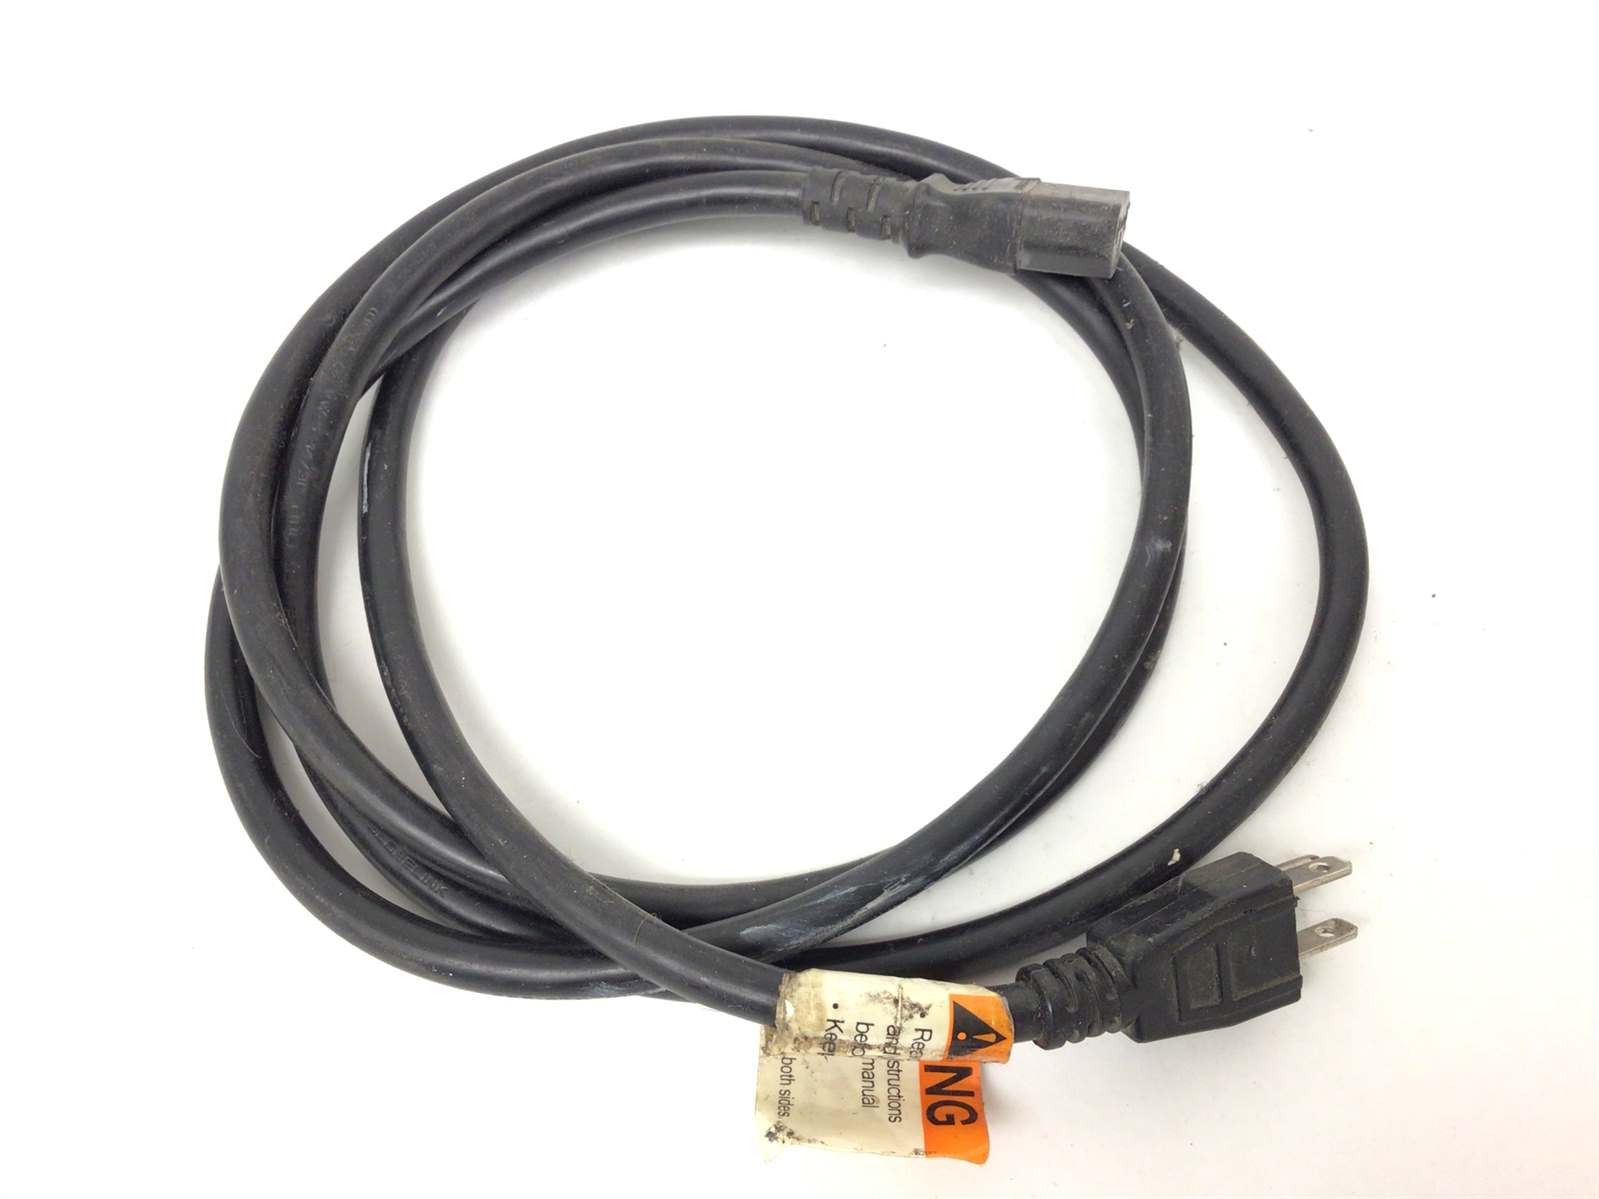 Power Line Cord (Used)